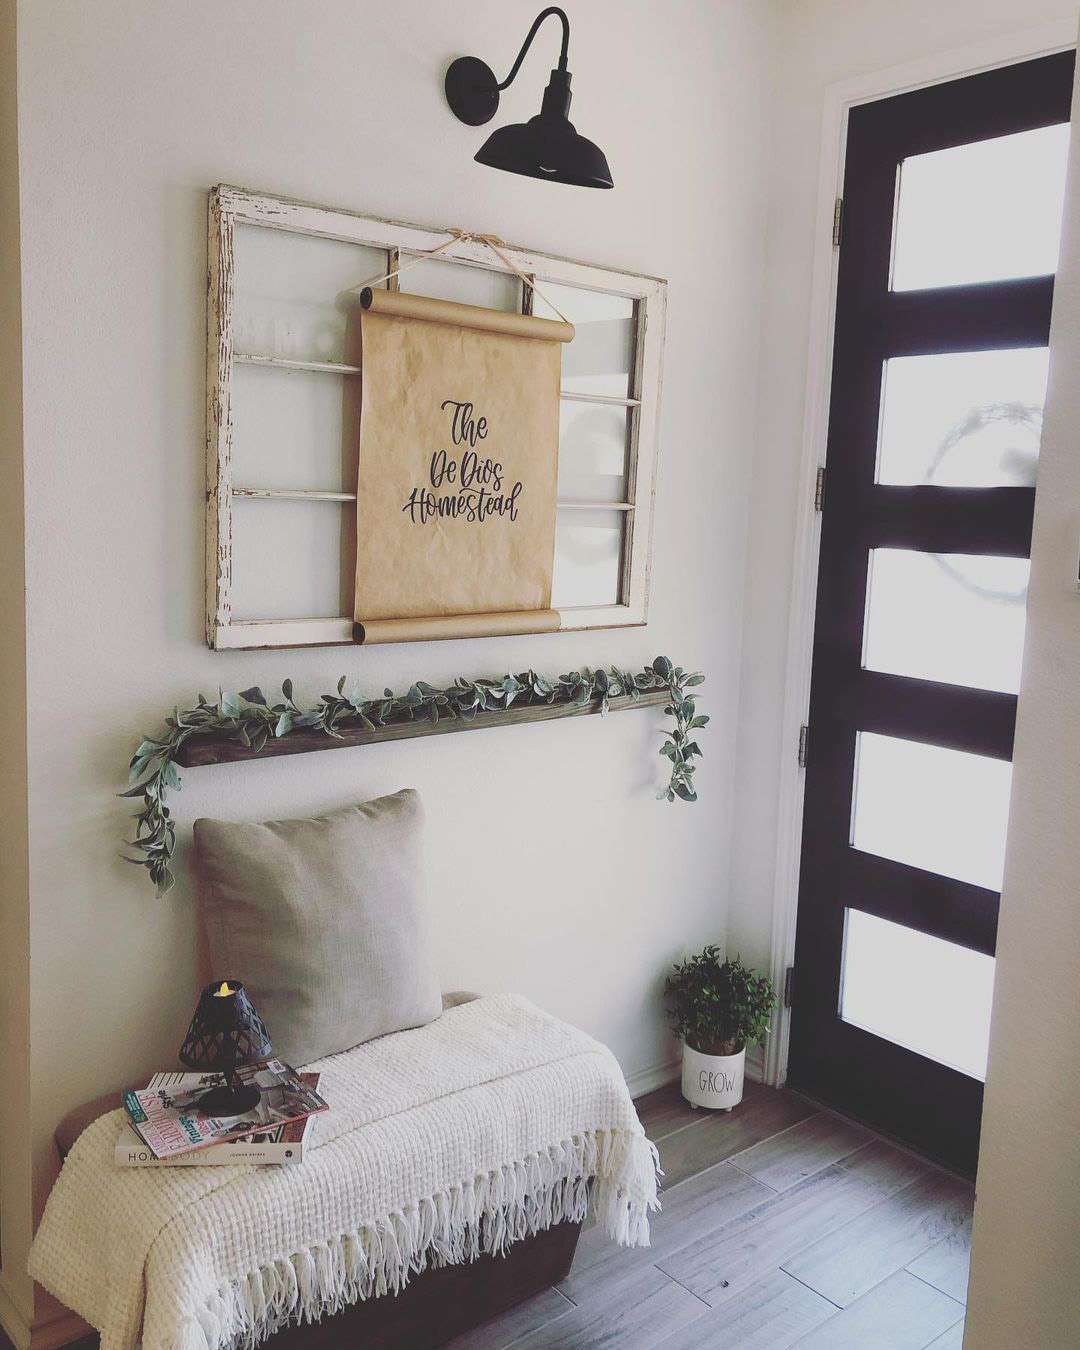 A scroll hung over a vintage window frame